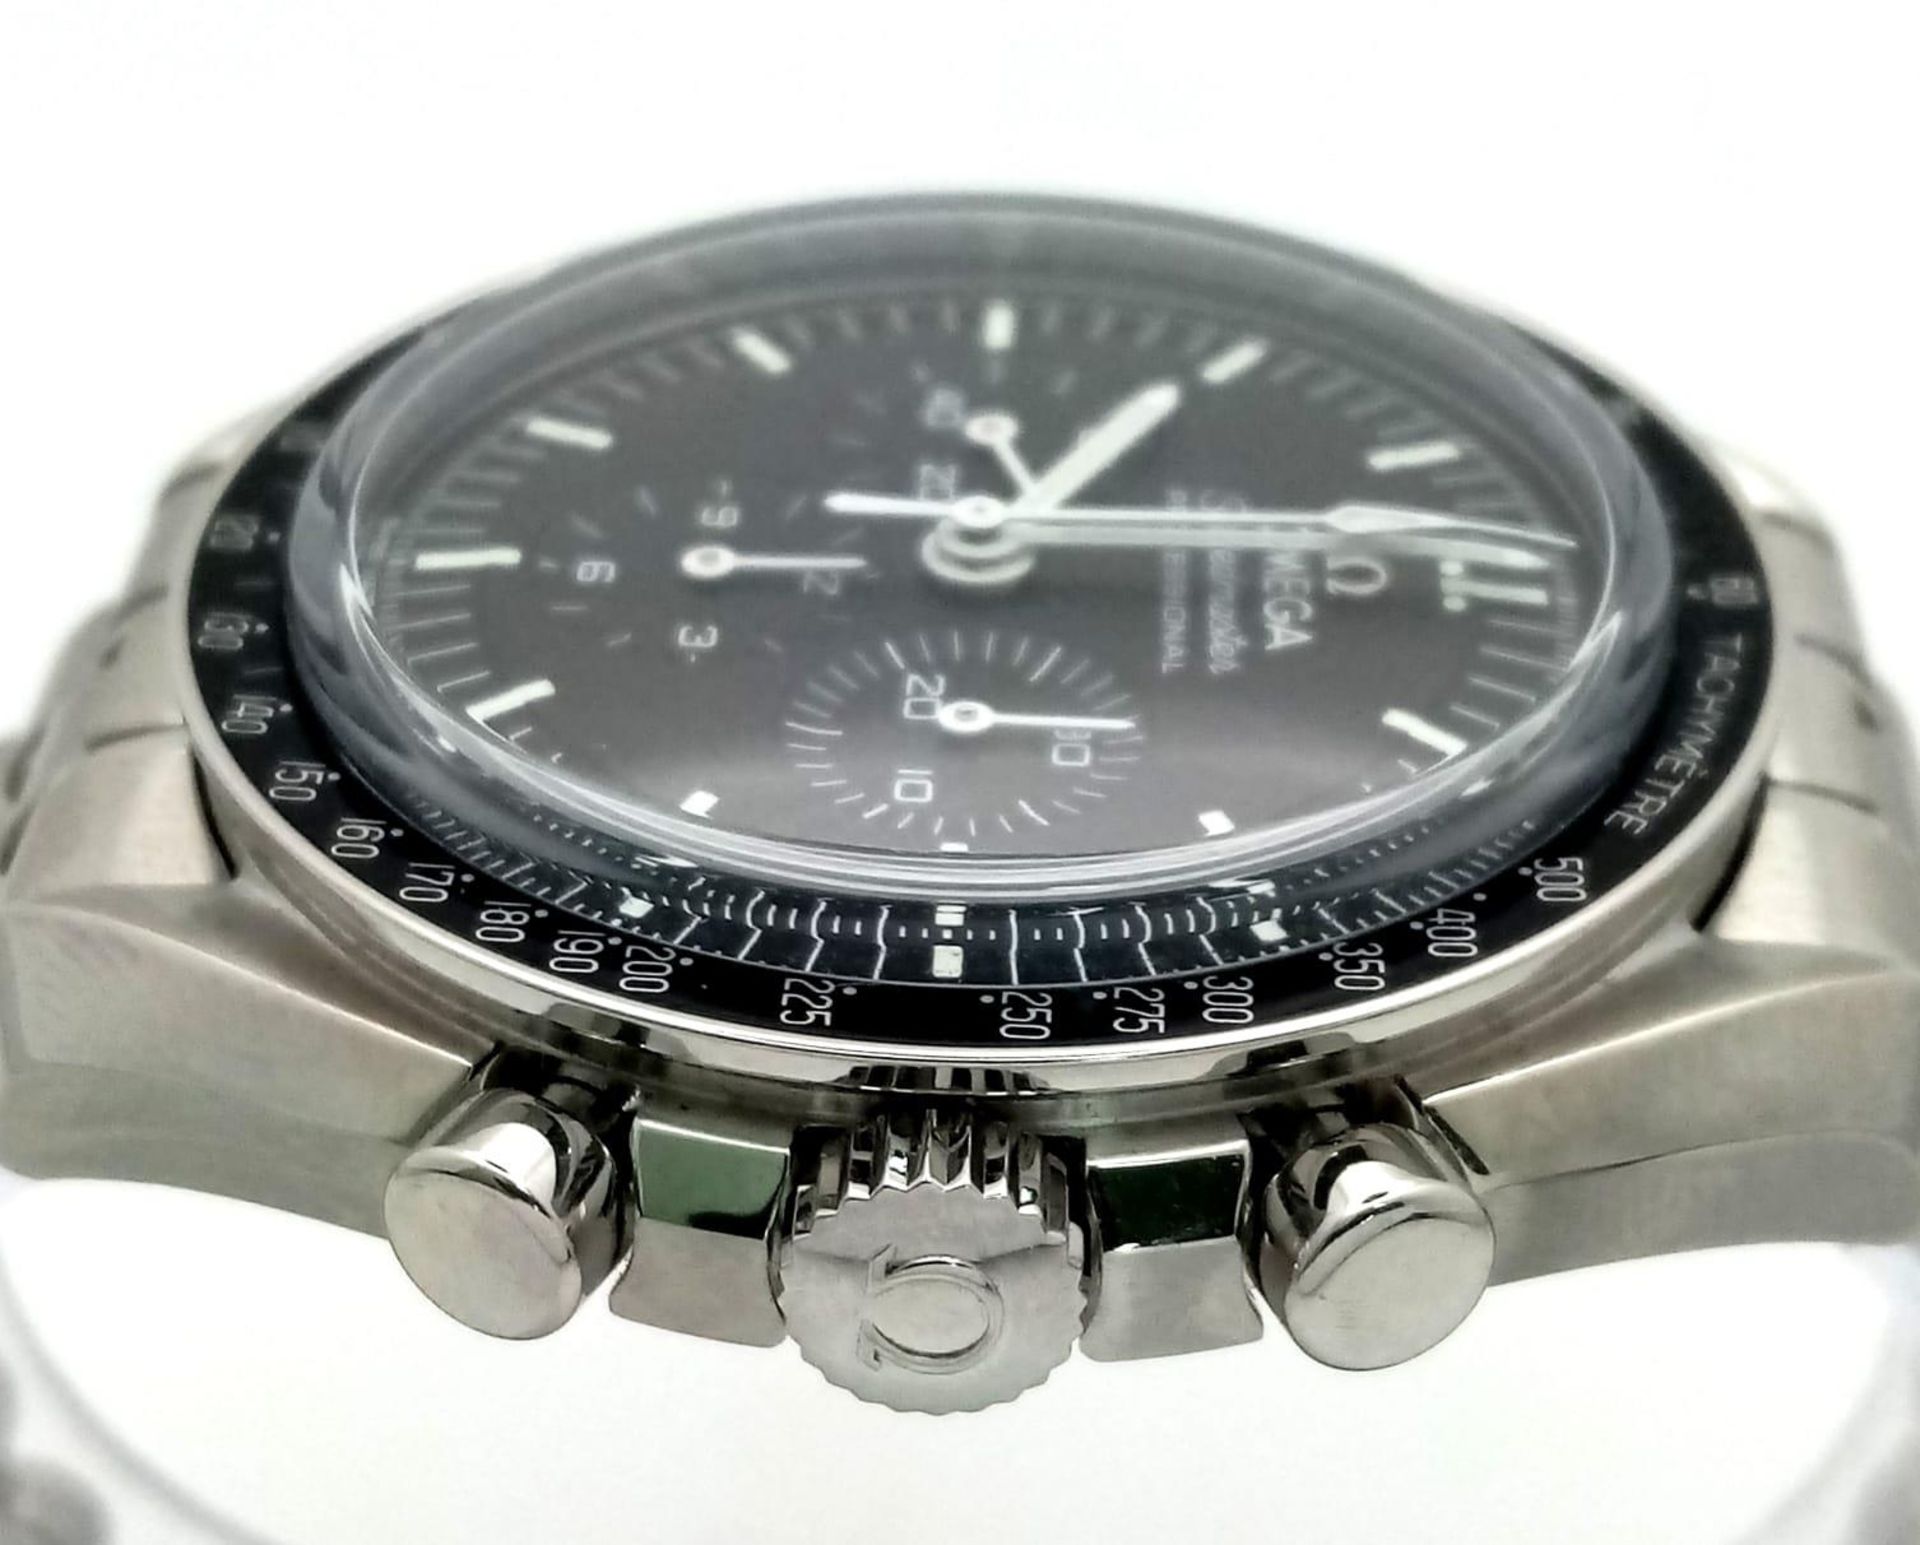 An Omega Speedmaster Moonwatch Chronograph Gents Watch. Stainless steel bracelet and case - 42mm. - Image 6 of 19